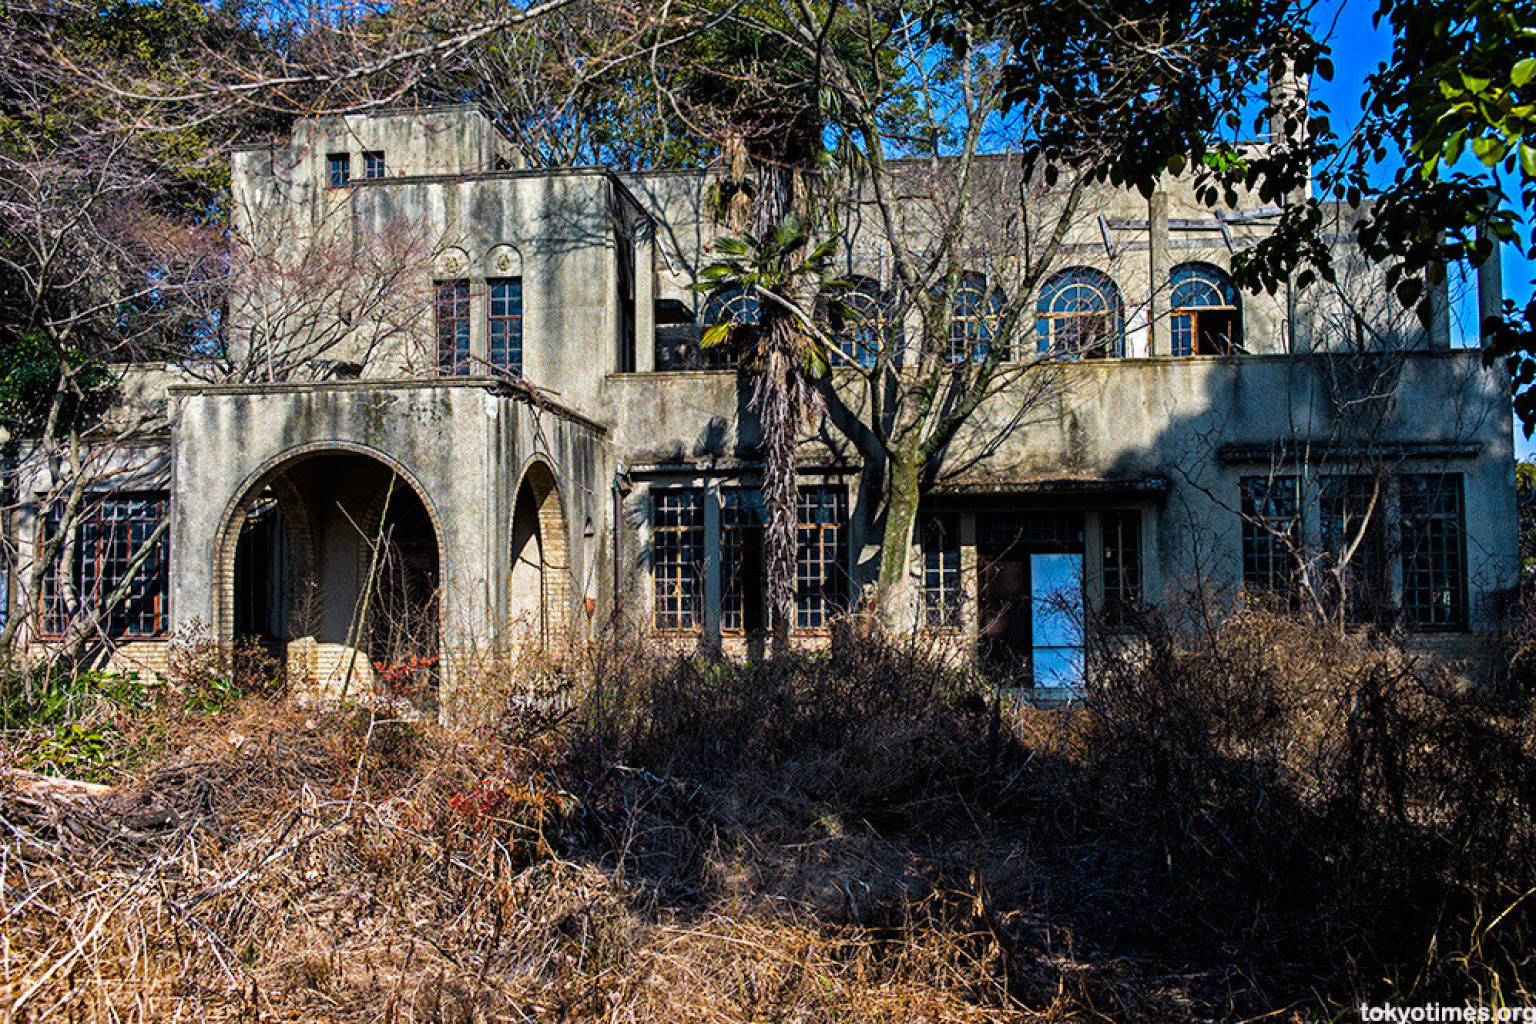 Abandoned Japanese Home Was Once A Grand Mansion, Now Mysteriously